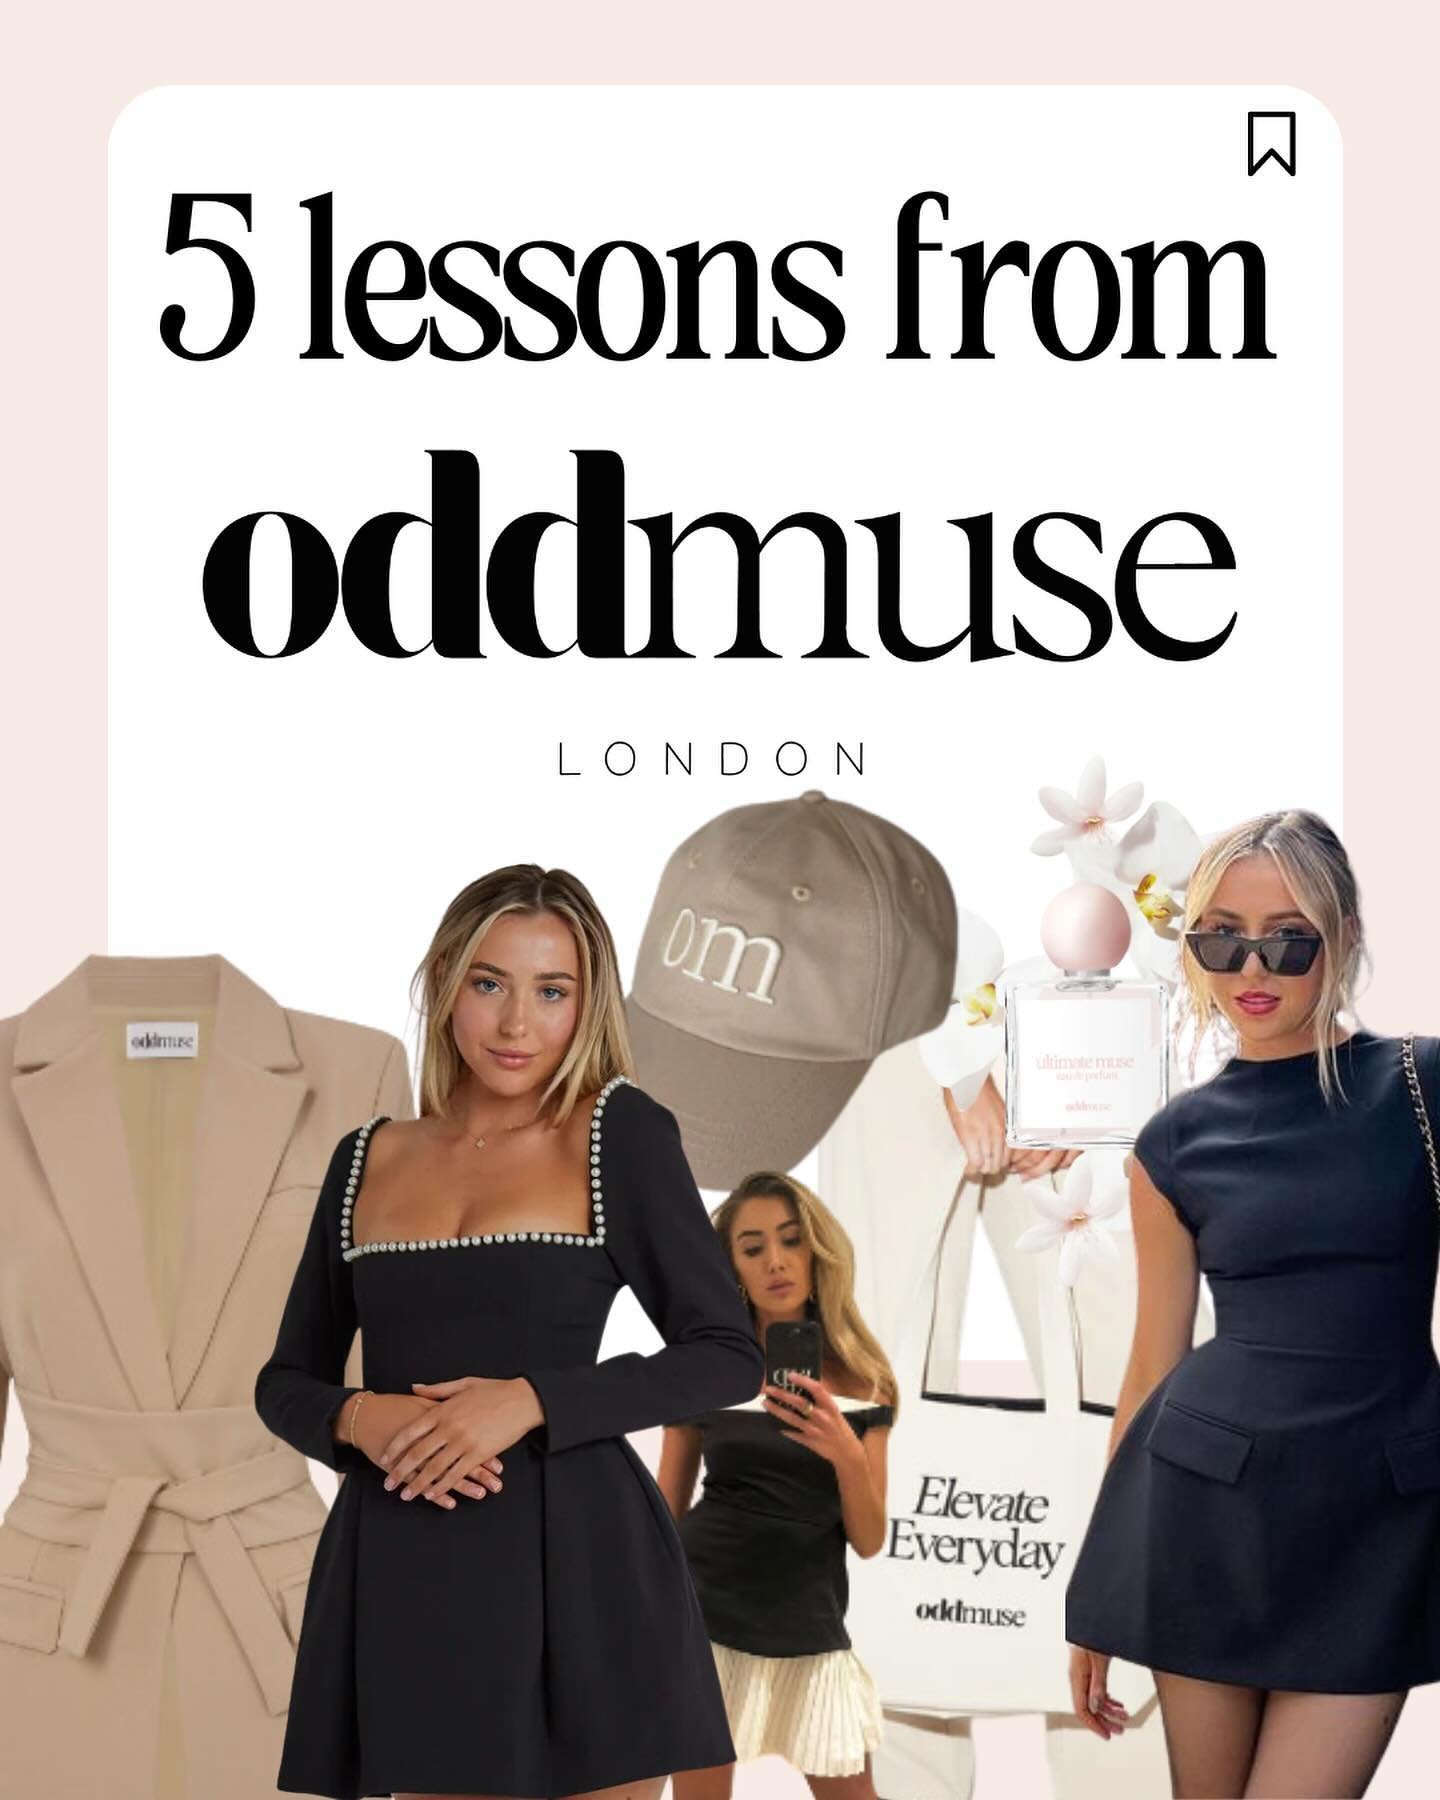 Save this post for future reference ✨ There&rsquo;s a tonne of gold nuggets from Aimee that you can takeaway and implement to grow &amp; scale your own fashion brand! 

I really loved recording this episode, it was so interesting to hear an inspiring